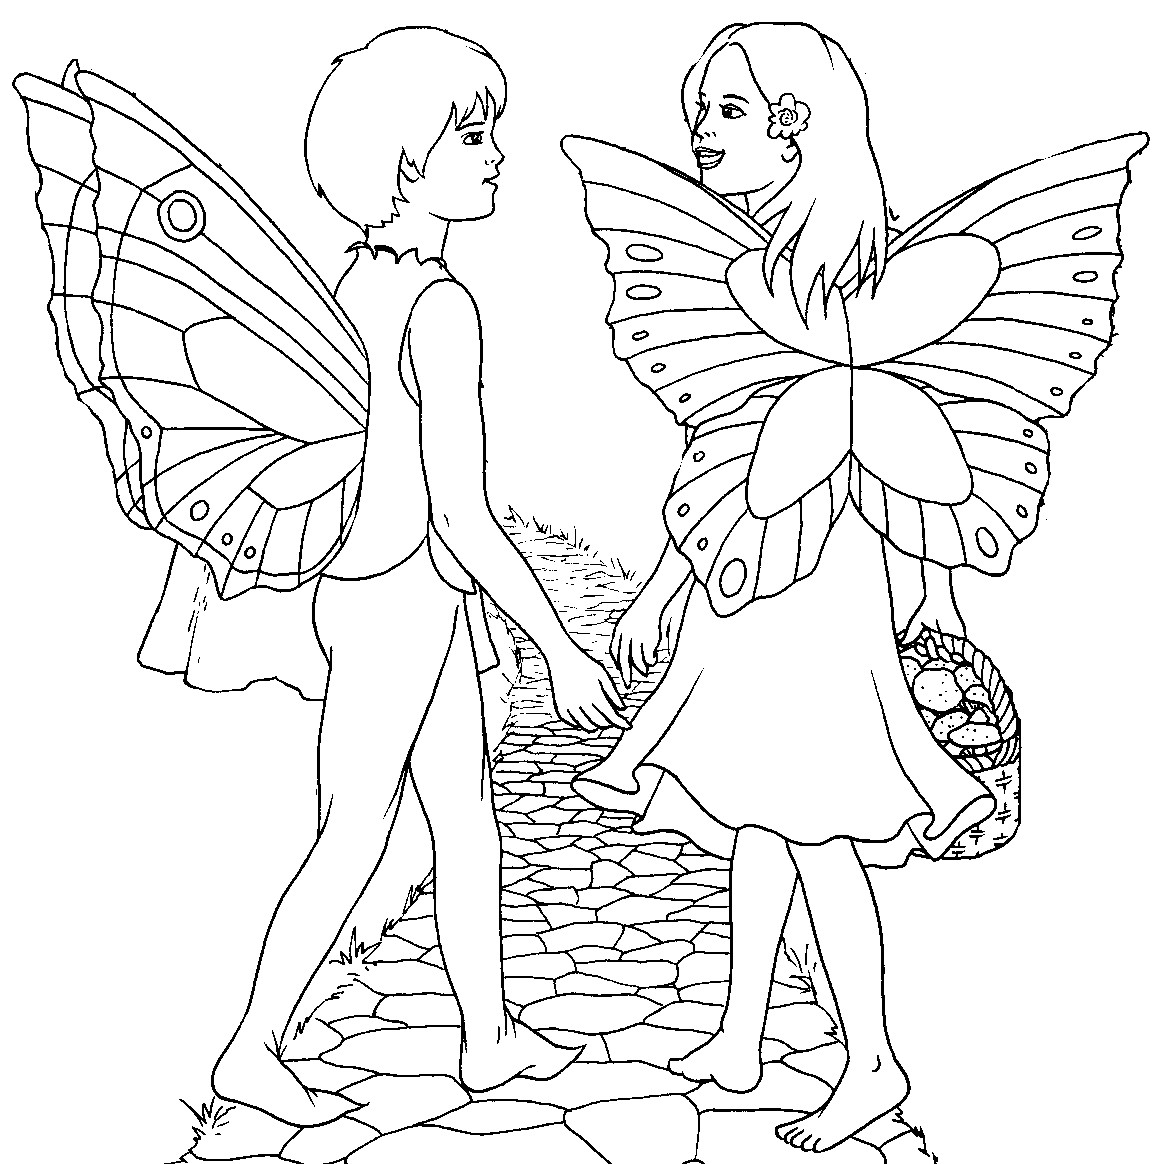 Coloring Pages For Girls Fairies
 FAIRY COLORING PAGES